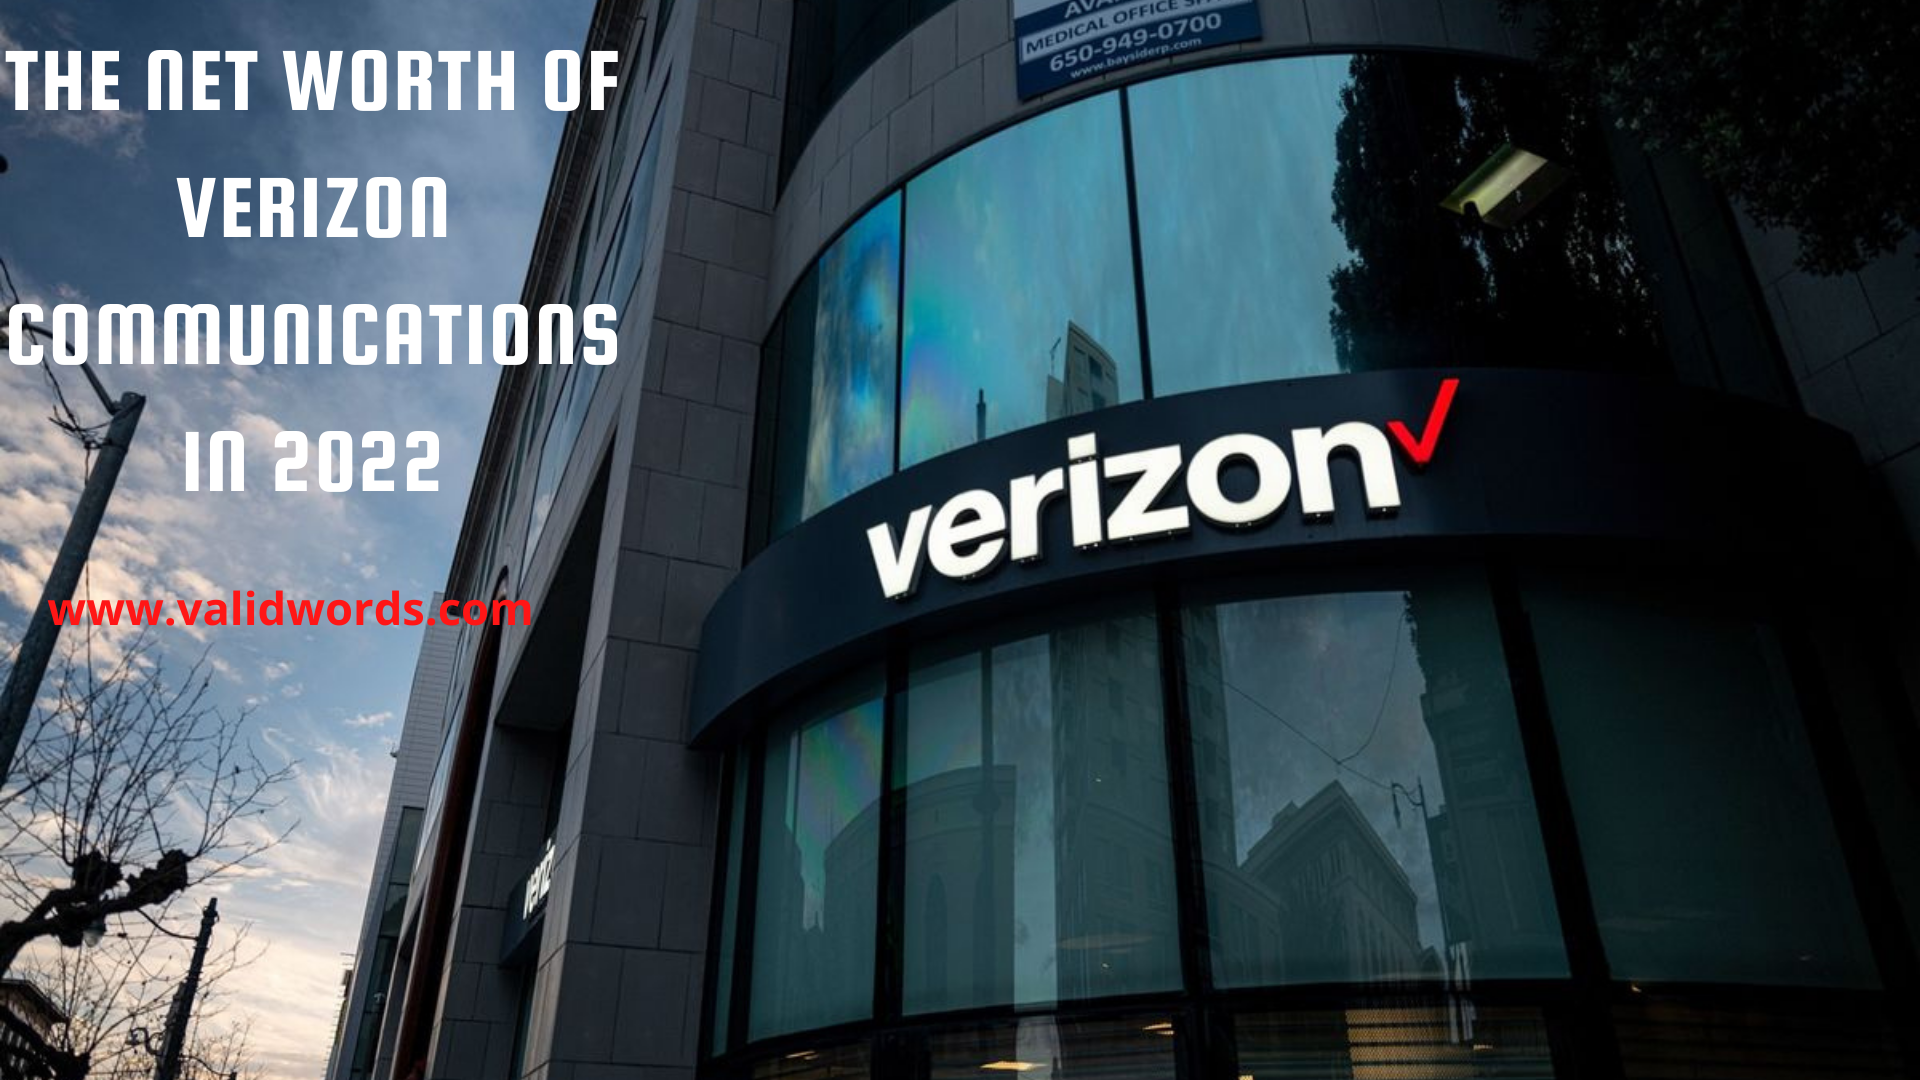 The Net Worth of Verizon Communications in 2022